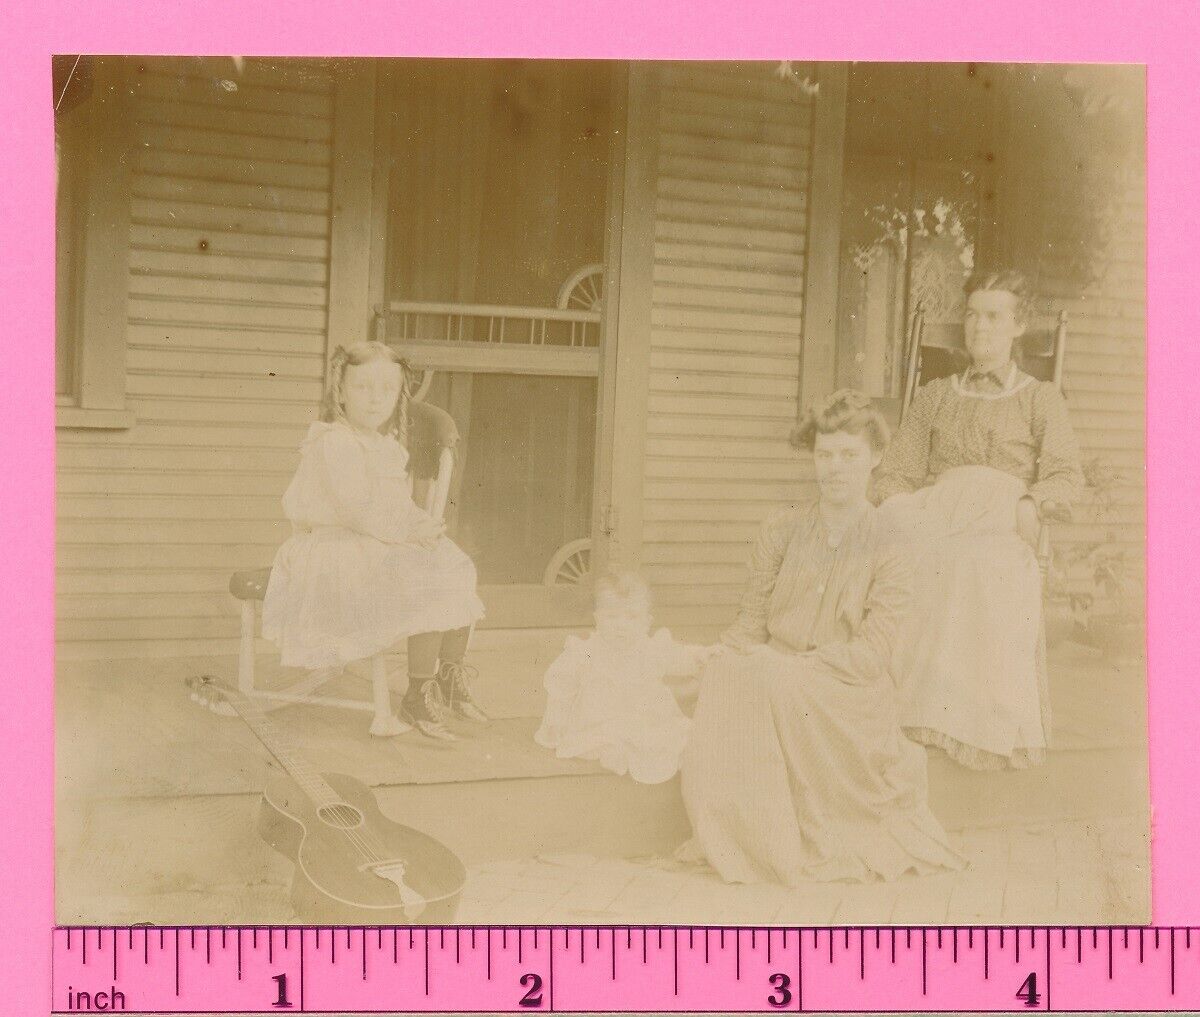 Women Musicians on Porch by Antique 6 String Guitar Vintage Snapshot Photo